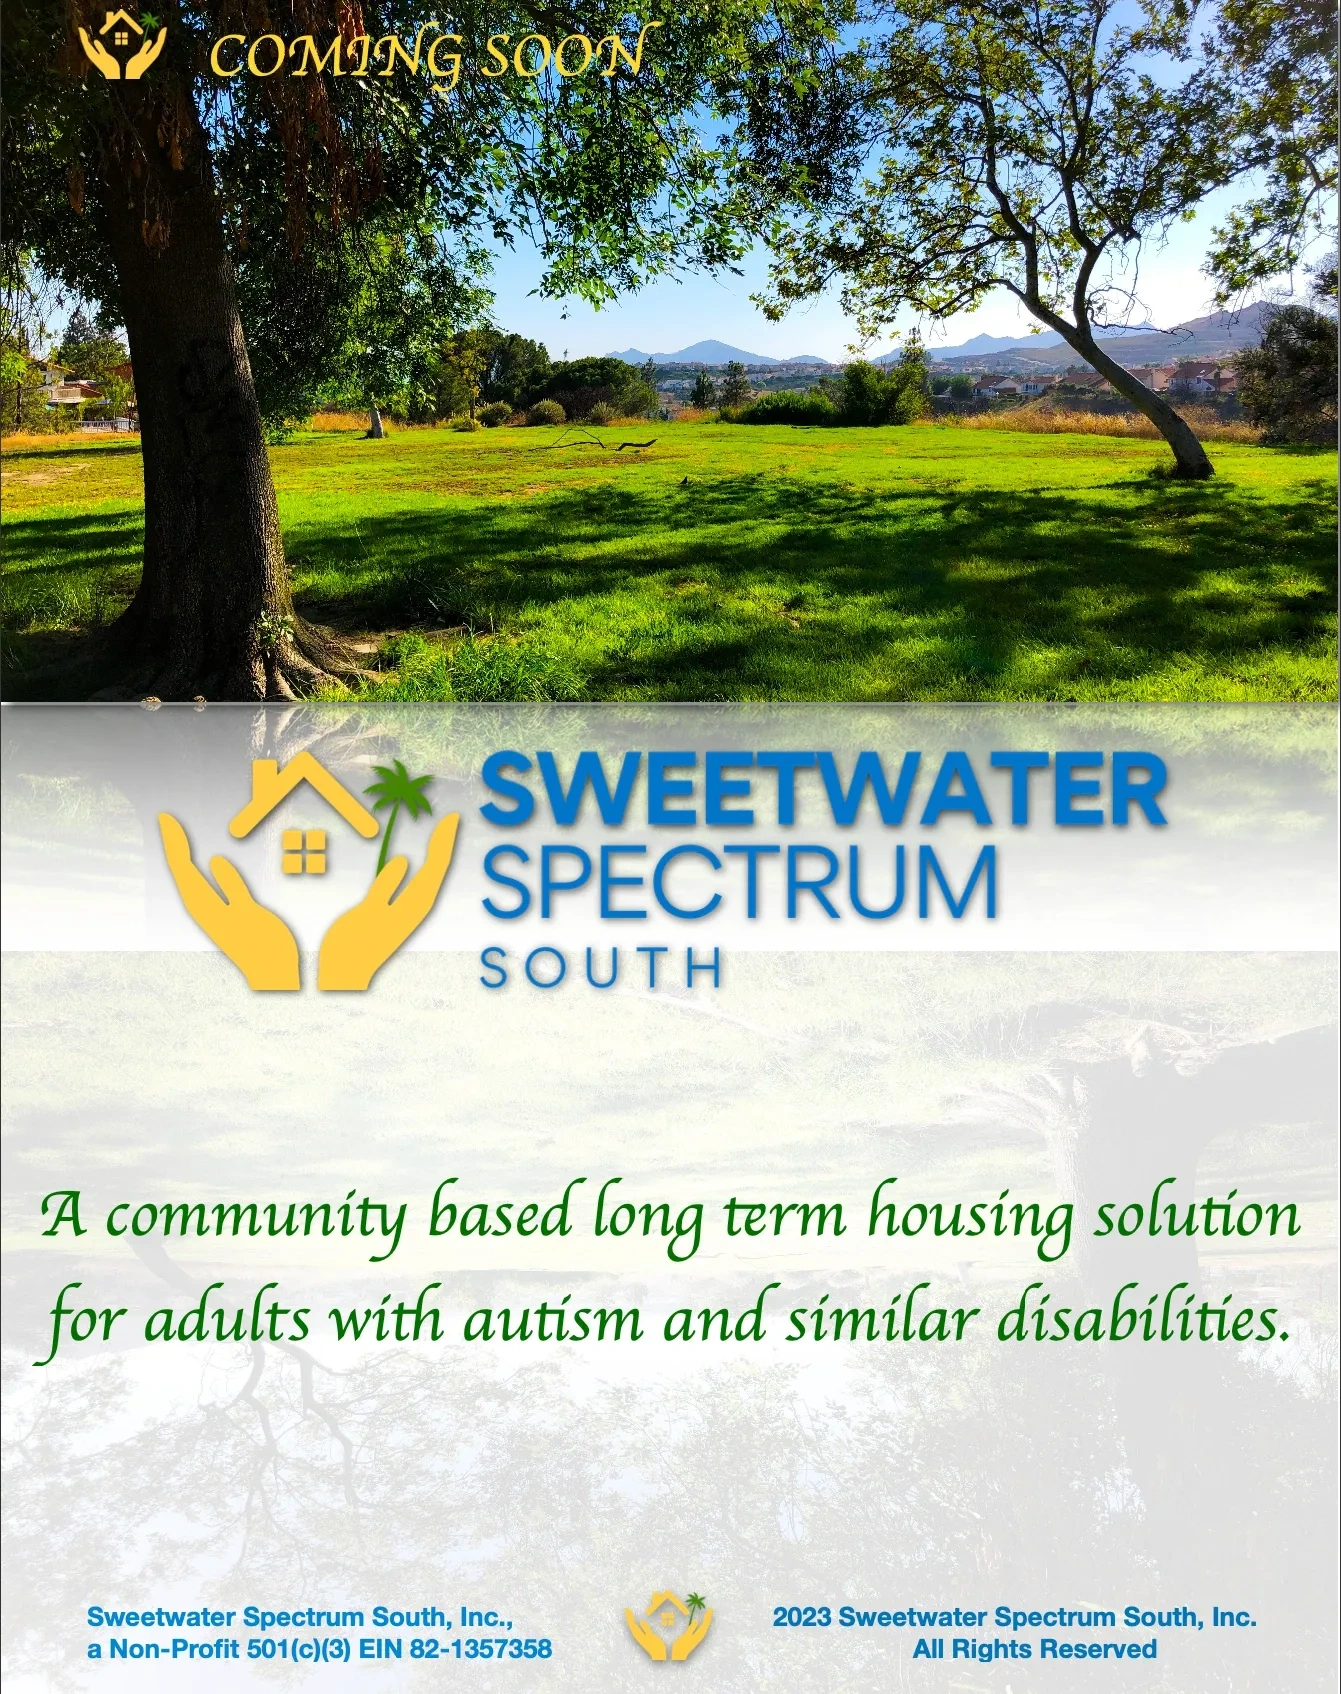 A community based long term housing solution for adults with autism in SoCal.